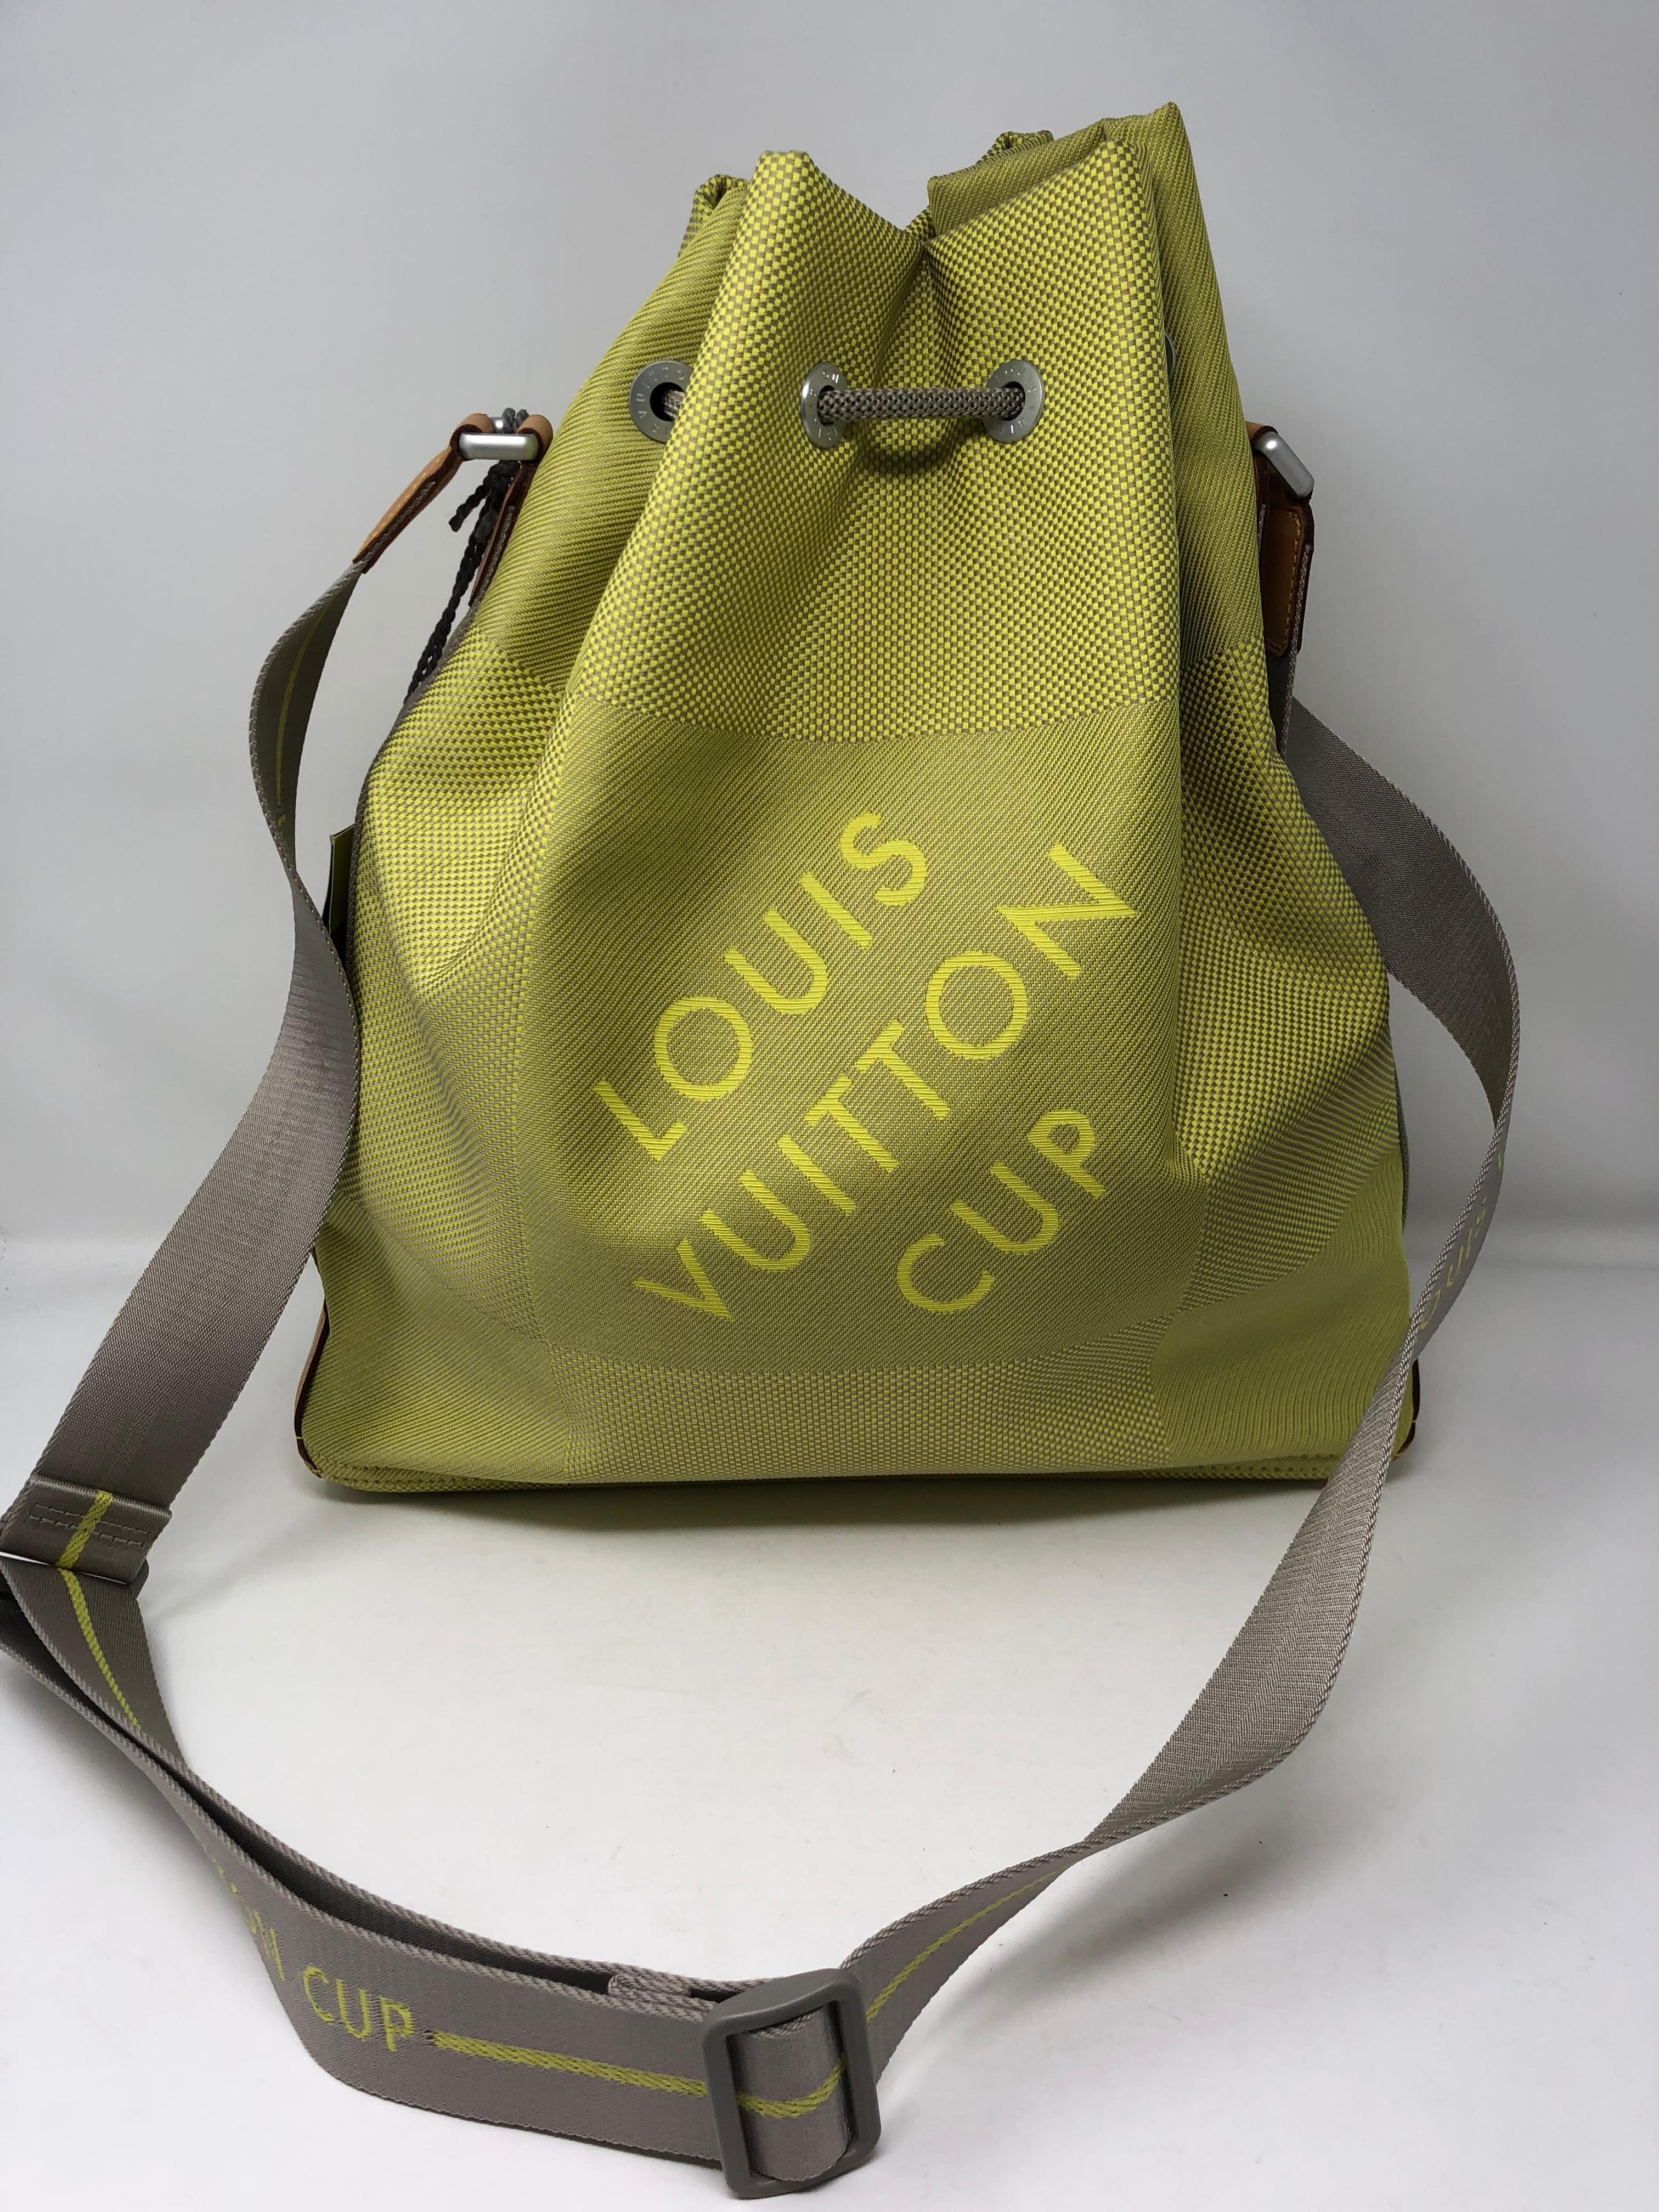 Louis Vuitton LV Cup Lime Green Damier Geant shoulder bucket bag from a limited America's Cup edition. Still has the original tag and brand new condition. Shoulder strap is adjustable and can be worn muultiple ways. Special Collector's piece. 